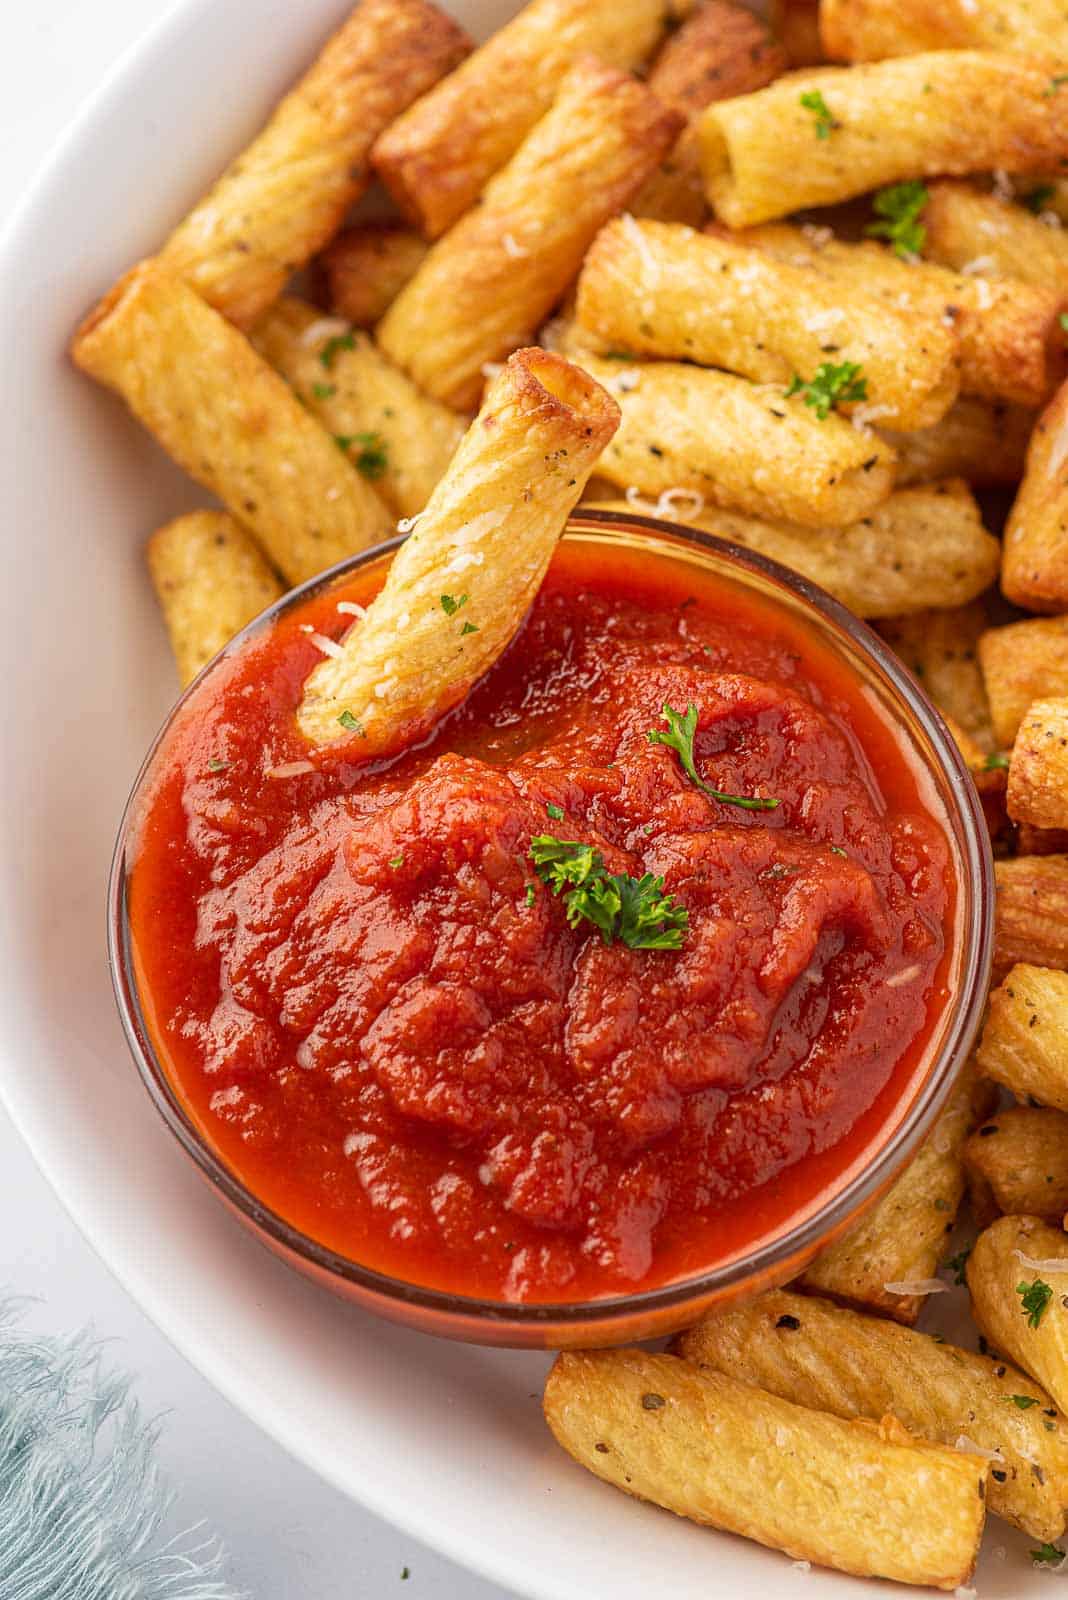 A plate of fried pasta chips and one fried noodle dipping into marinara sauce.